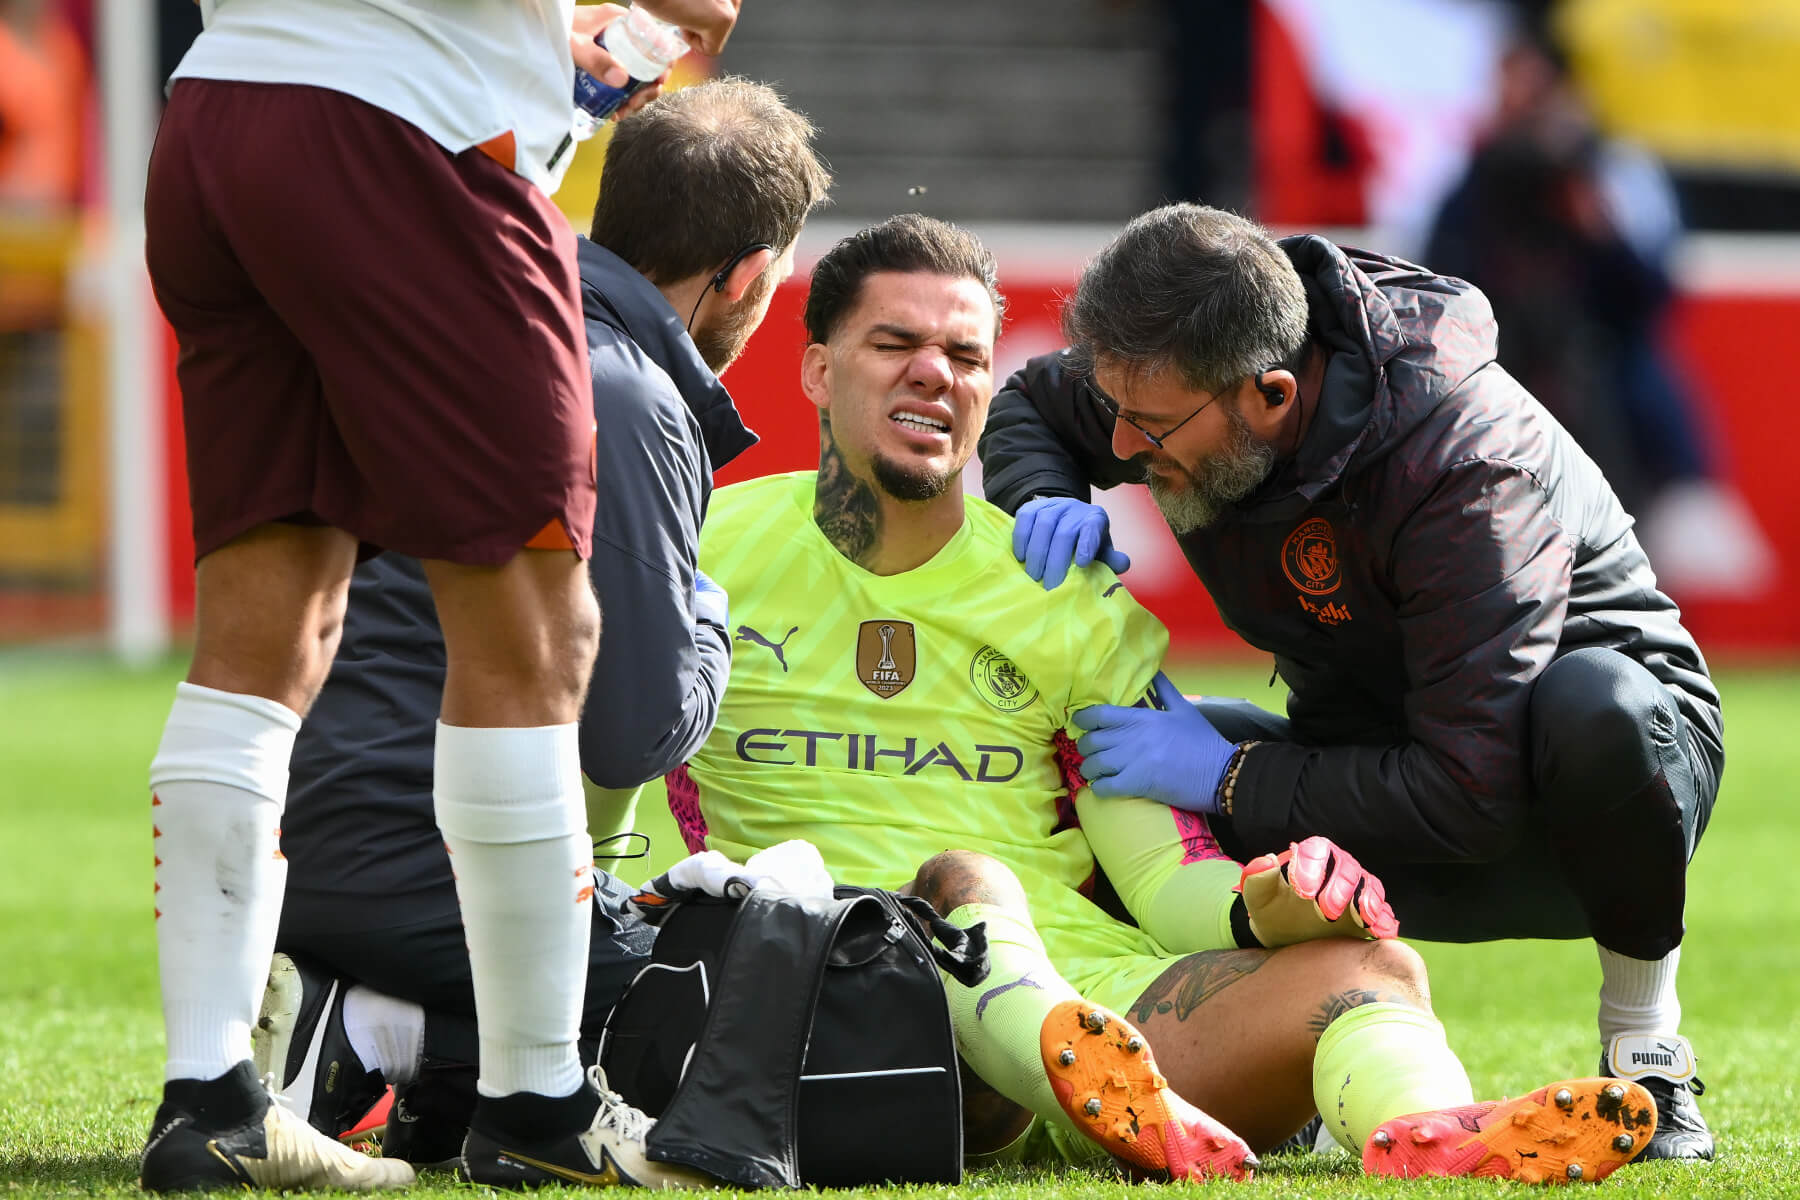 Manchester City’s Ederson expected to return from injury before end of season